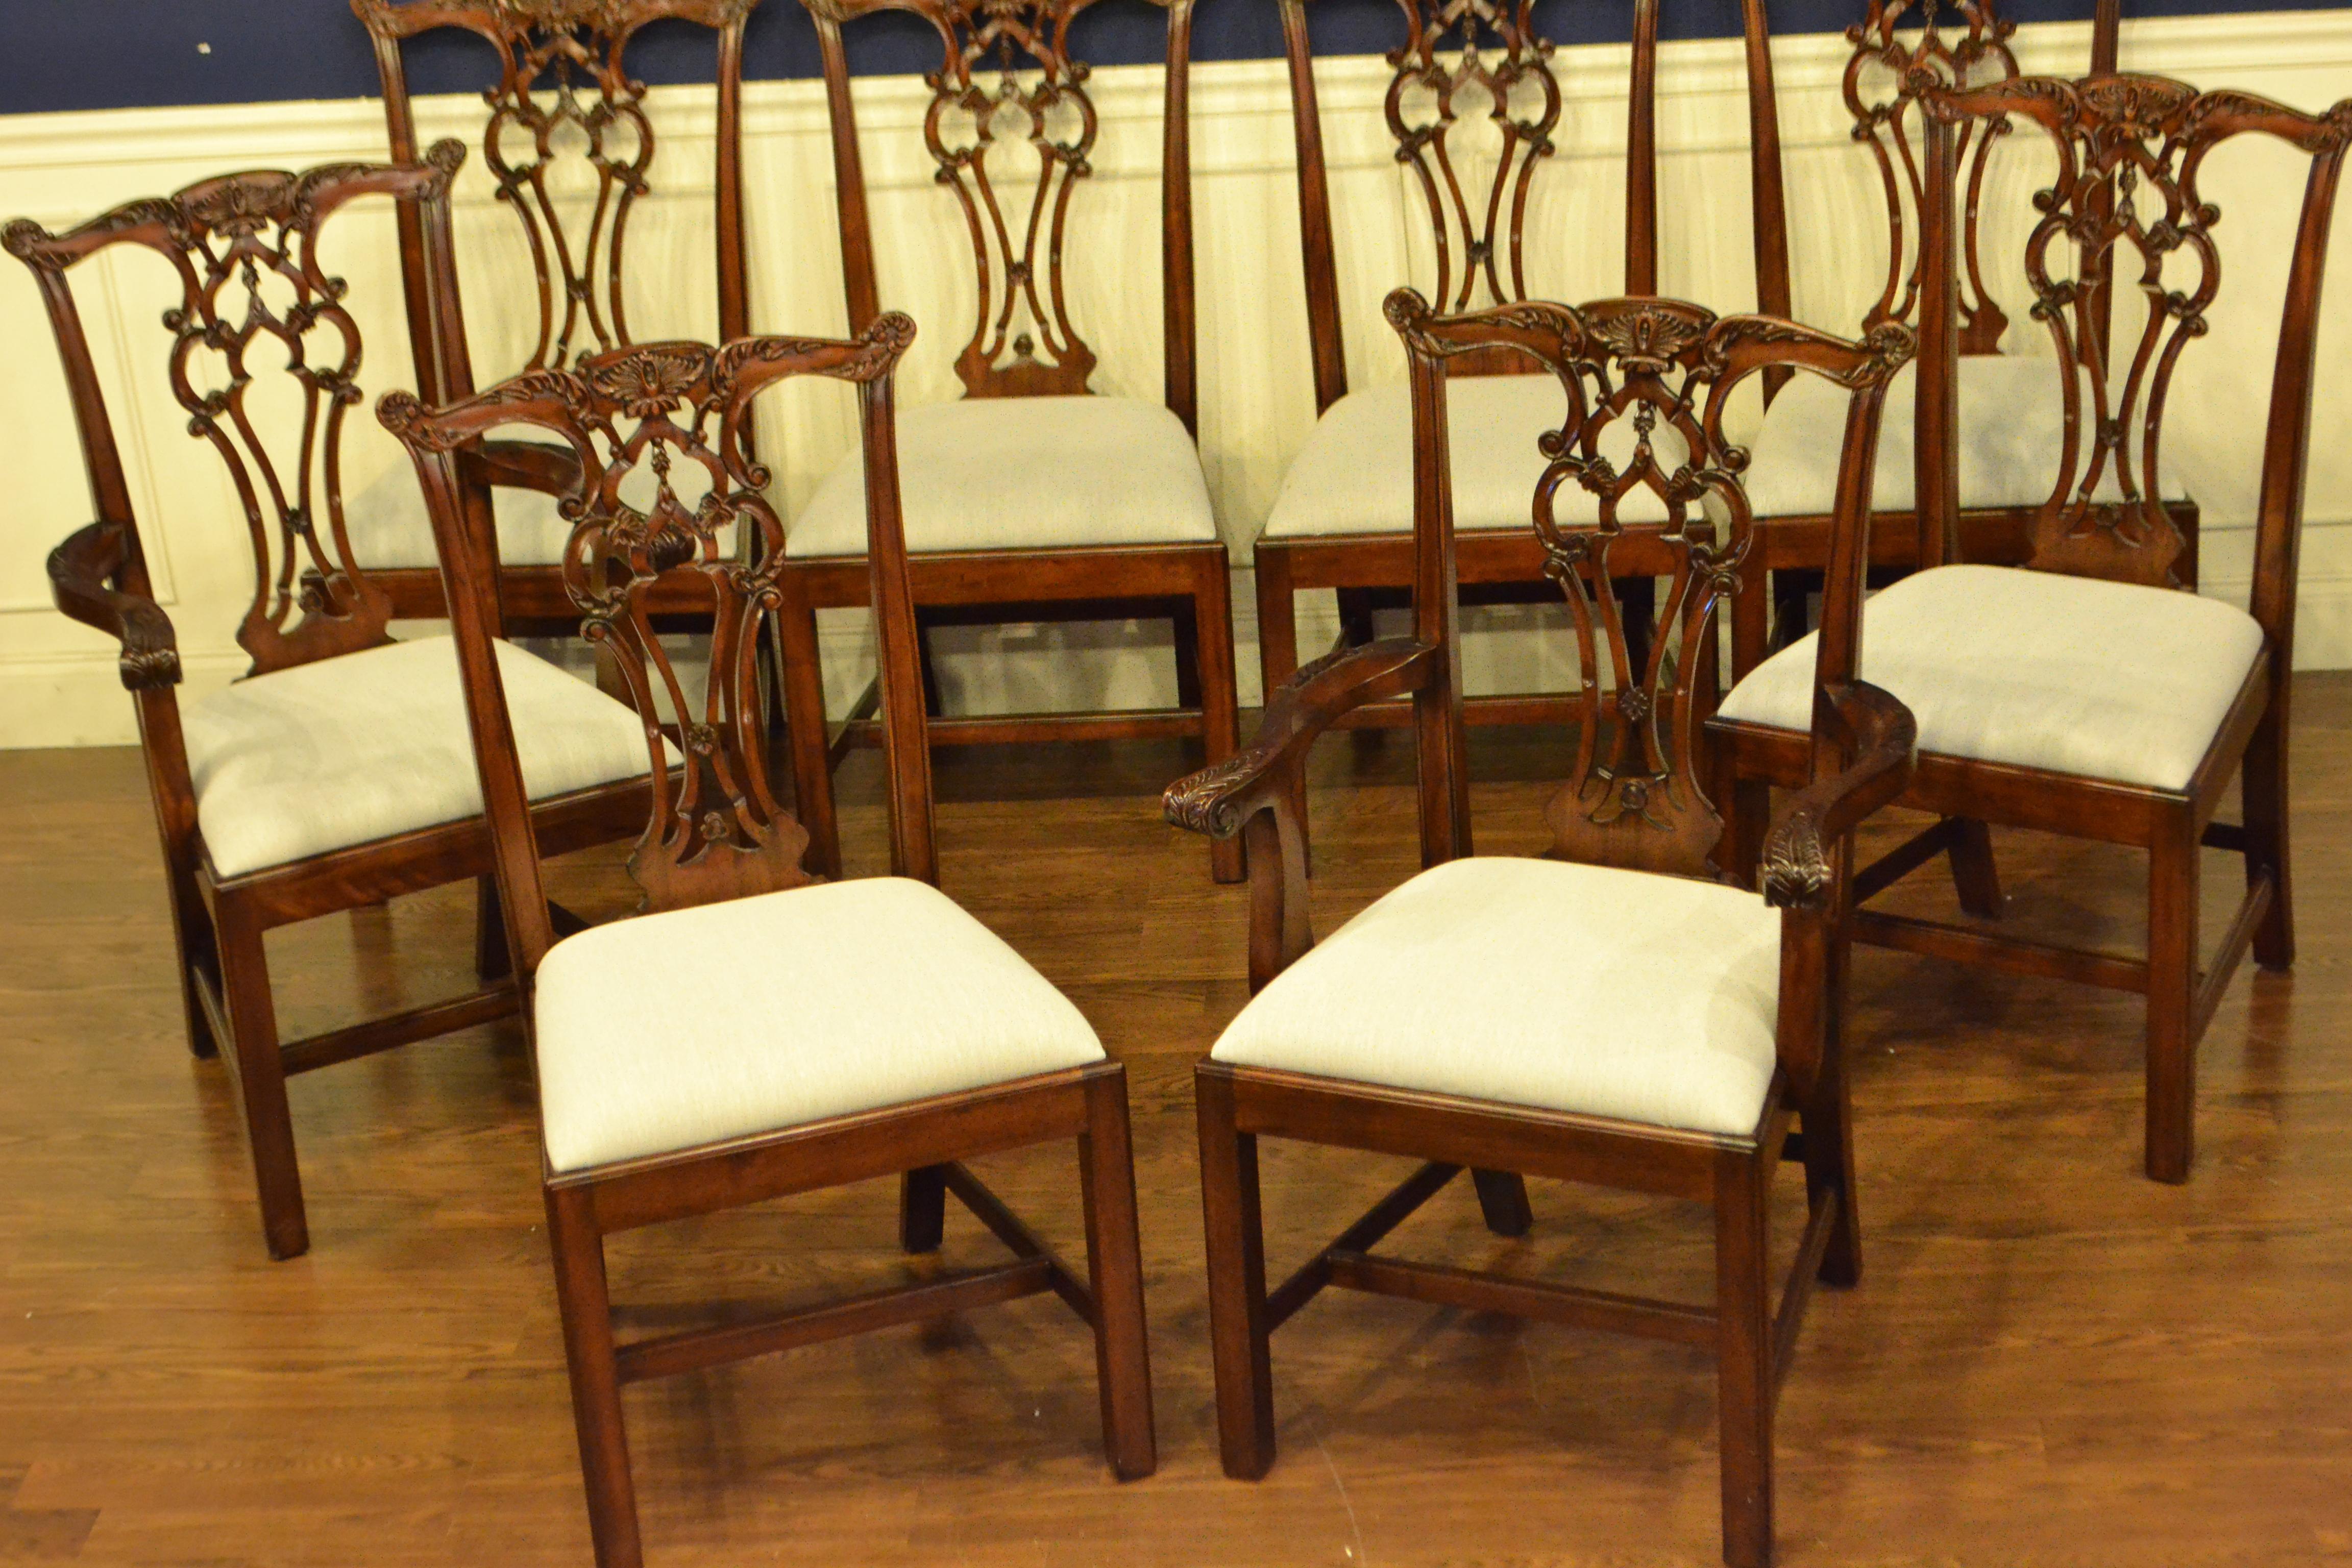 Georgian Eight New Mahogany Chippendale Style Straight Leg Dining Chairs by Leighton Hall